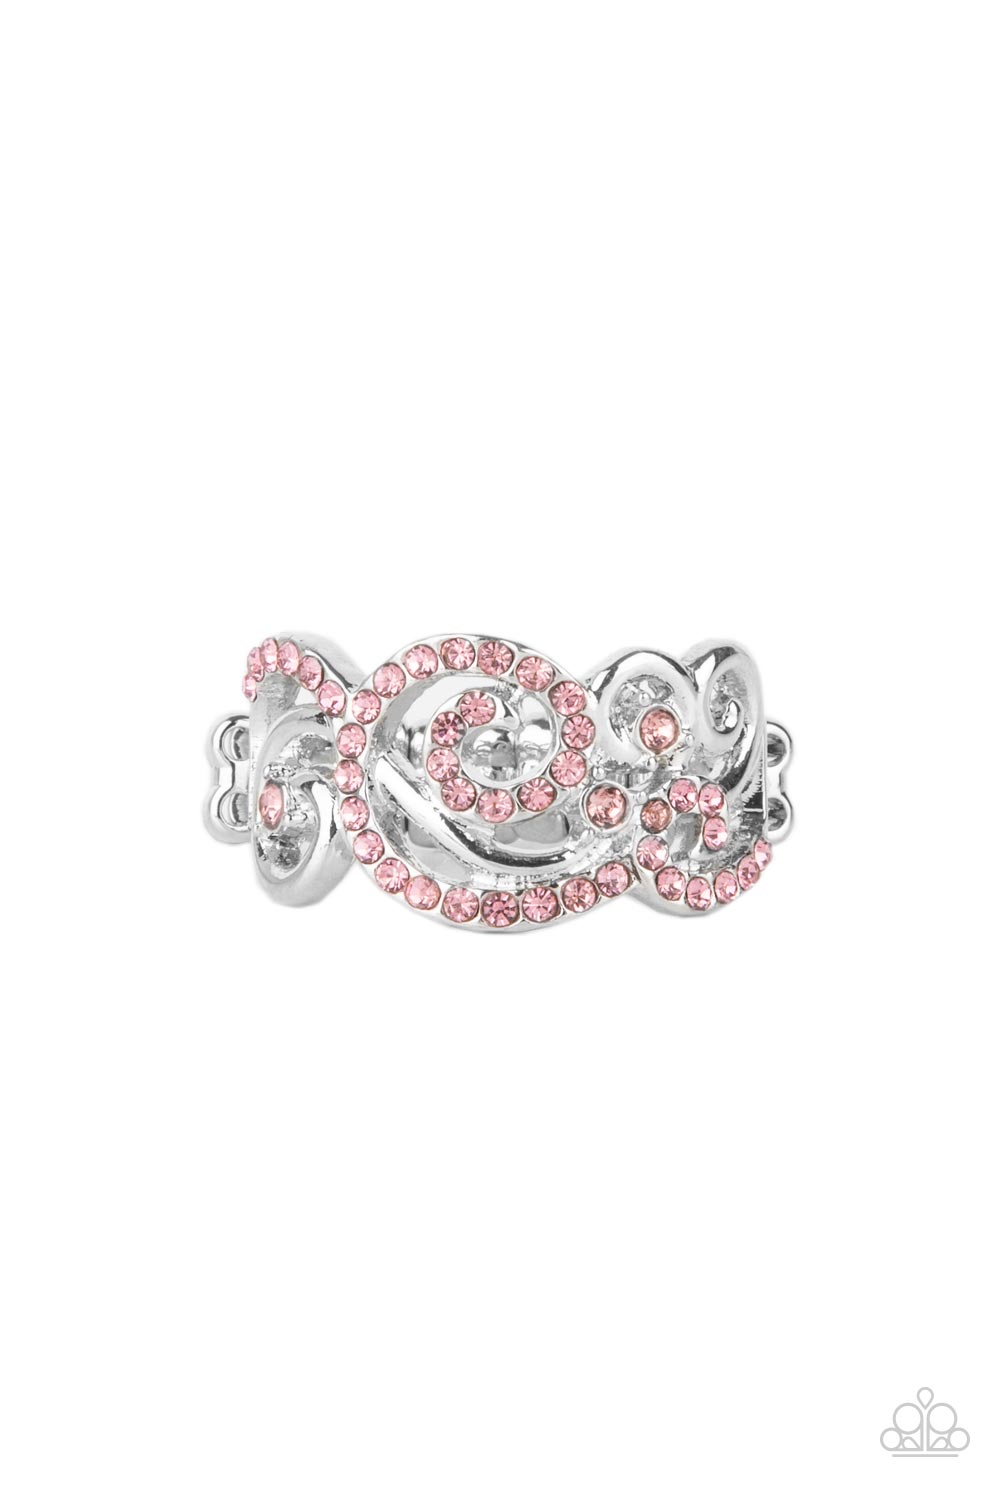 Melodic Motion Pink Ring - Paparazzi Accessories  An ornamental silver scrollwork frame, adorned with dainty sparkling pink rhinestones travels across the finger in a melodic display. Features a dainty stretchy band for a flexible fit.  All Paparazzi Accessories are lead free and nickel free!  Sold as one individual ring.